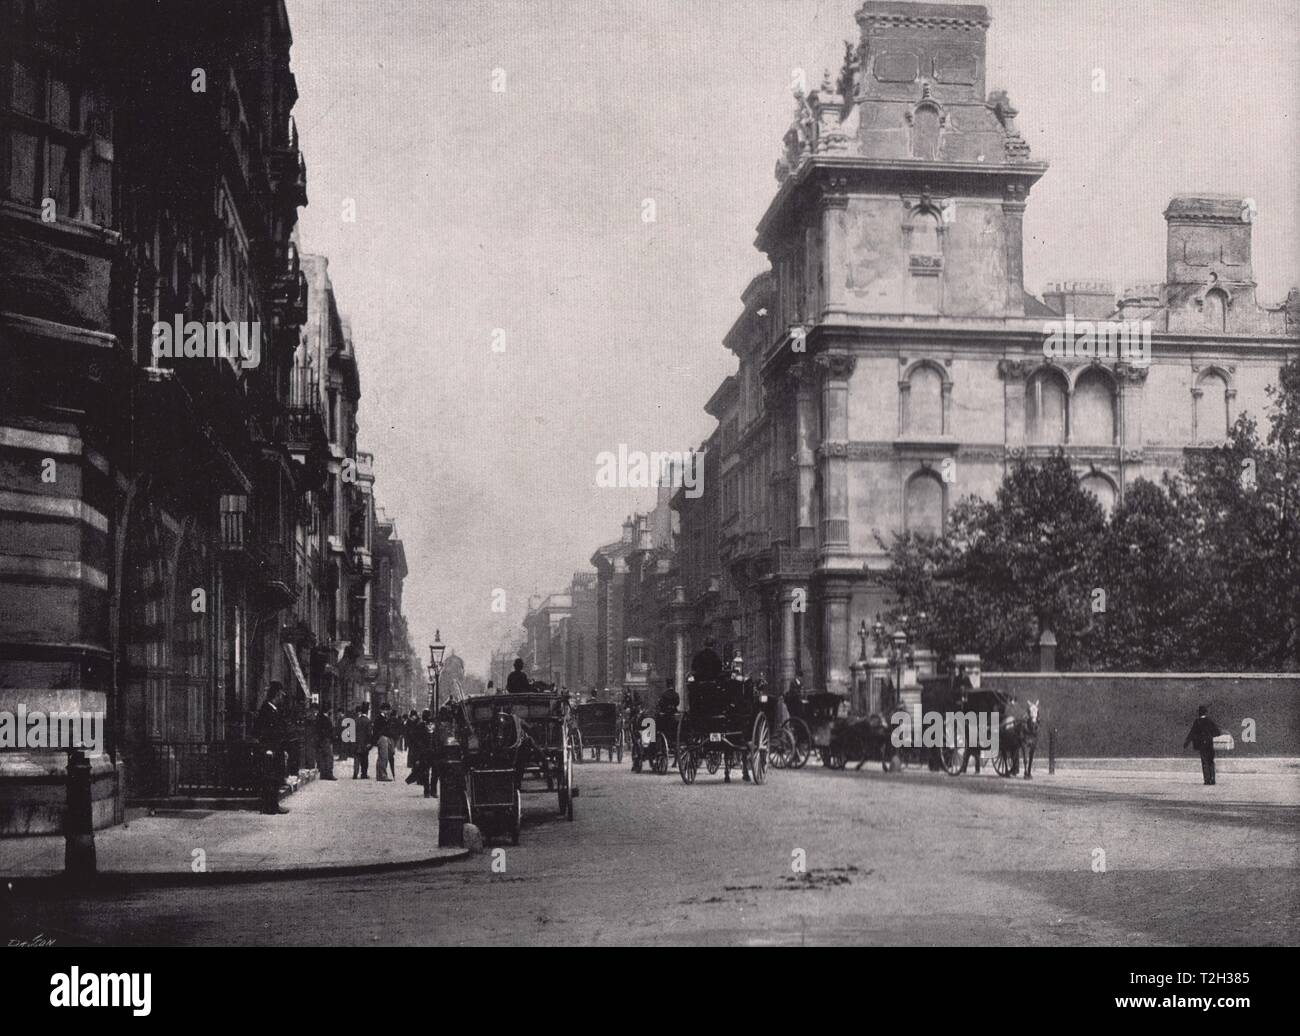 Pall Mall - from the Bottom of St. James's street Stock Photo